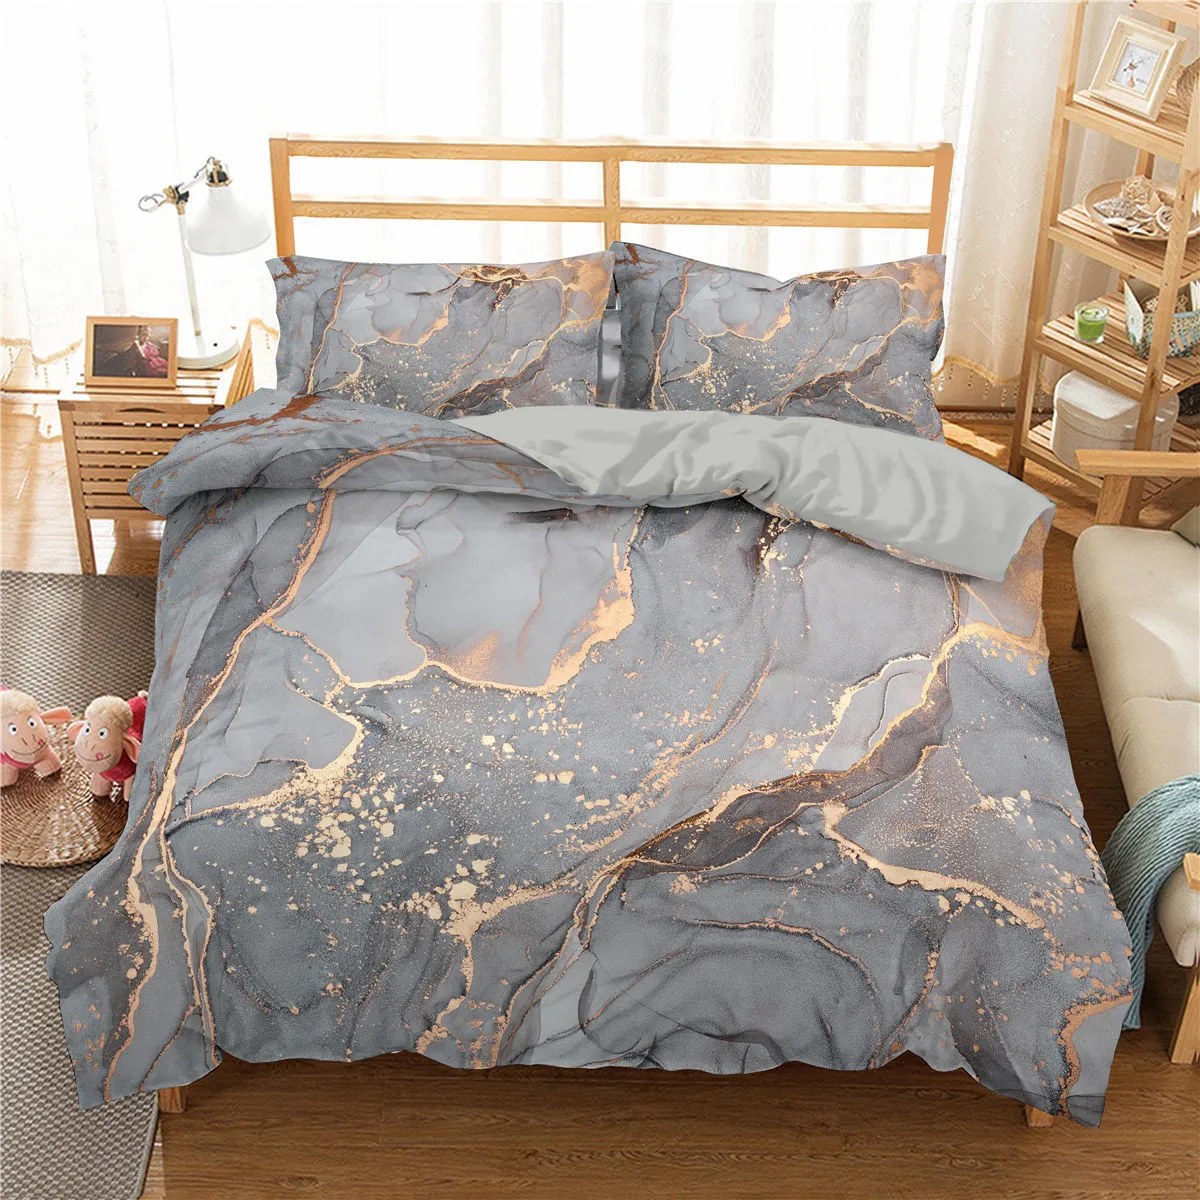 Bedding sets Marble Bedding Set KingQueen Size Grey Gold Marble Duvet Cover Men Adults Modern Abstract Art Tie Dye Gothic Soft Quilt Cover 230324